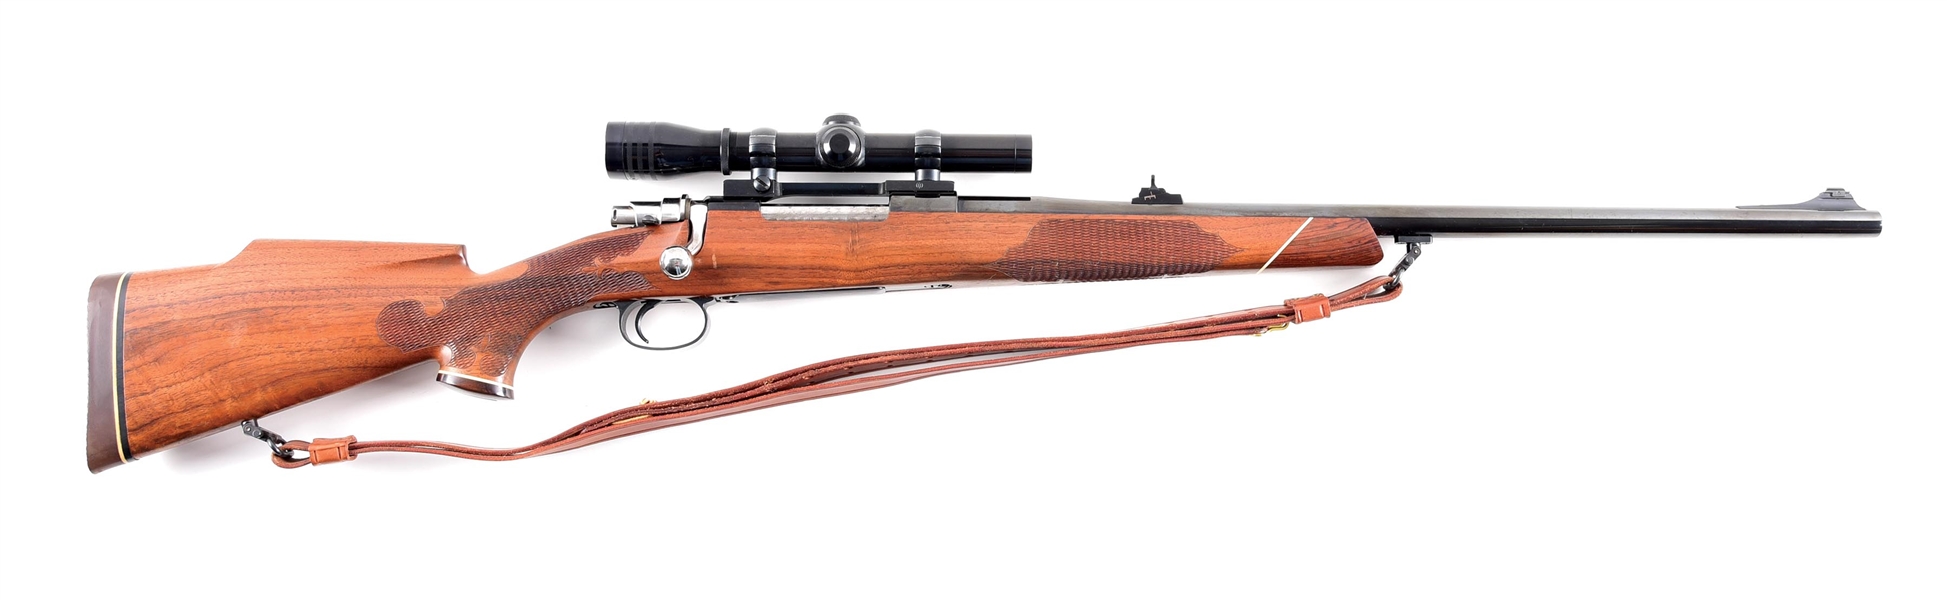 (C) EPPS ORILLA & CLINTON MAUSER BOLT ACTION RIFLE IN .458 WIN MAG.